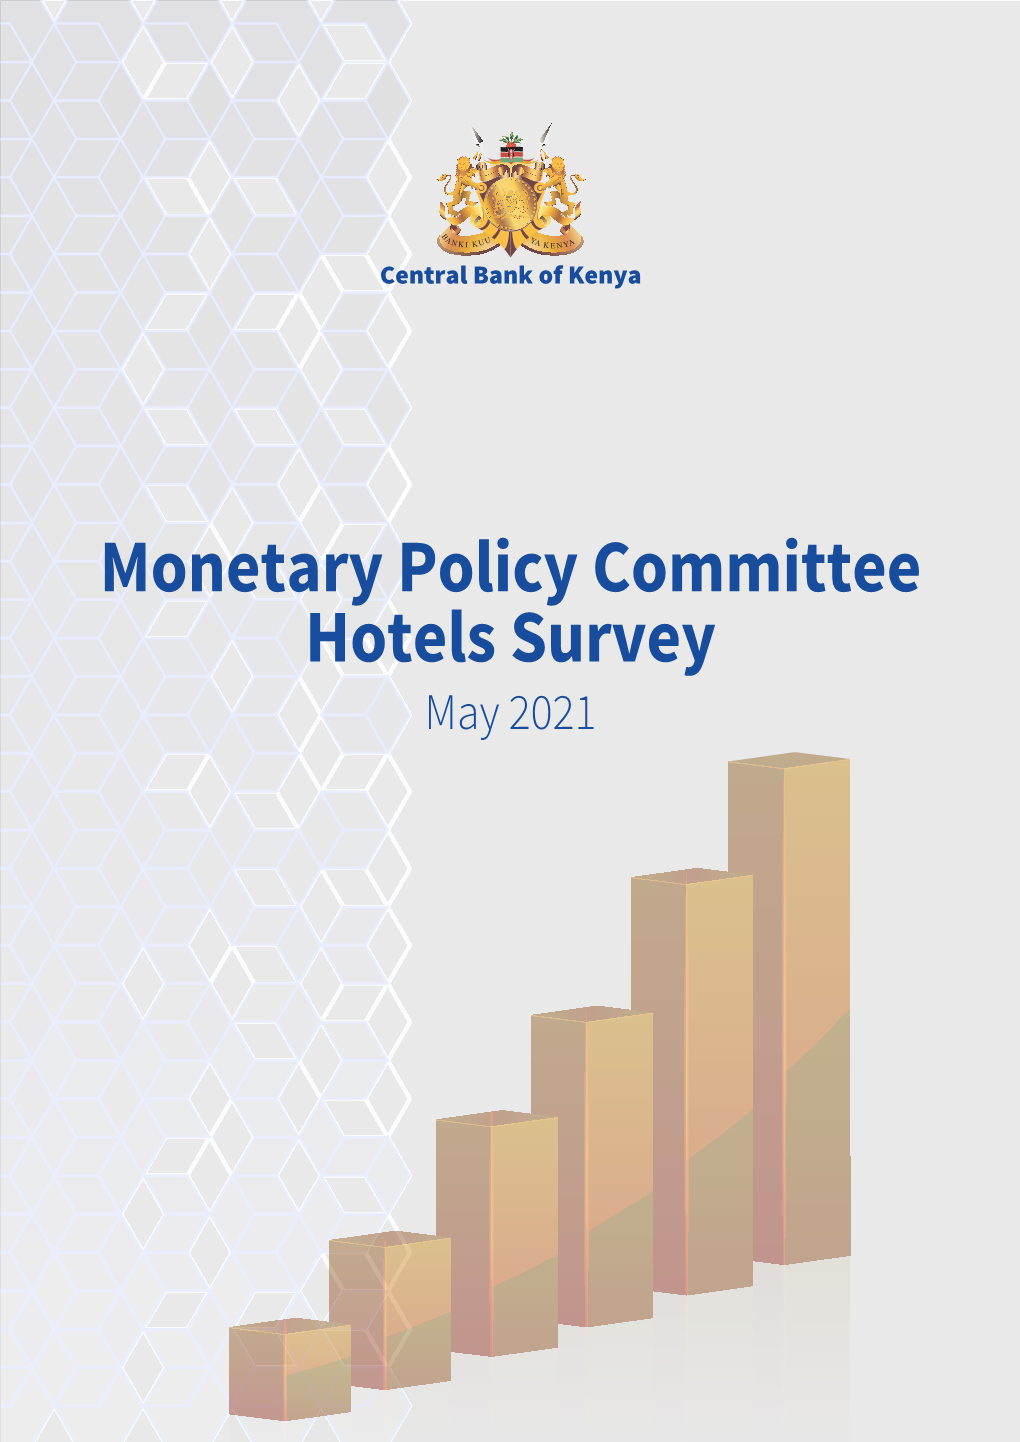 Monetary Policy Committee Hotel Survey-May 2021